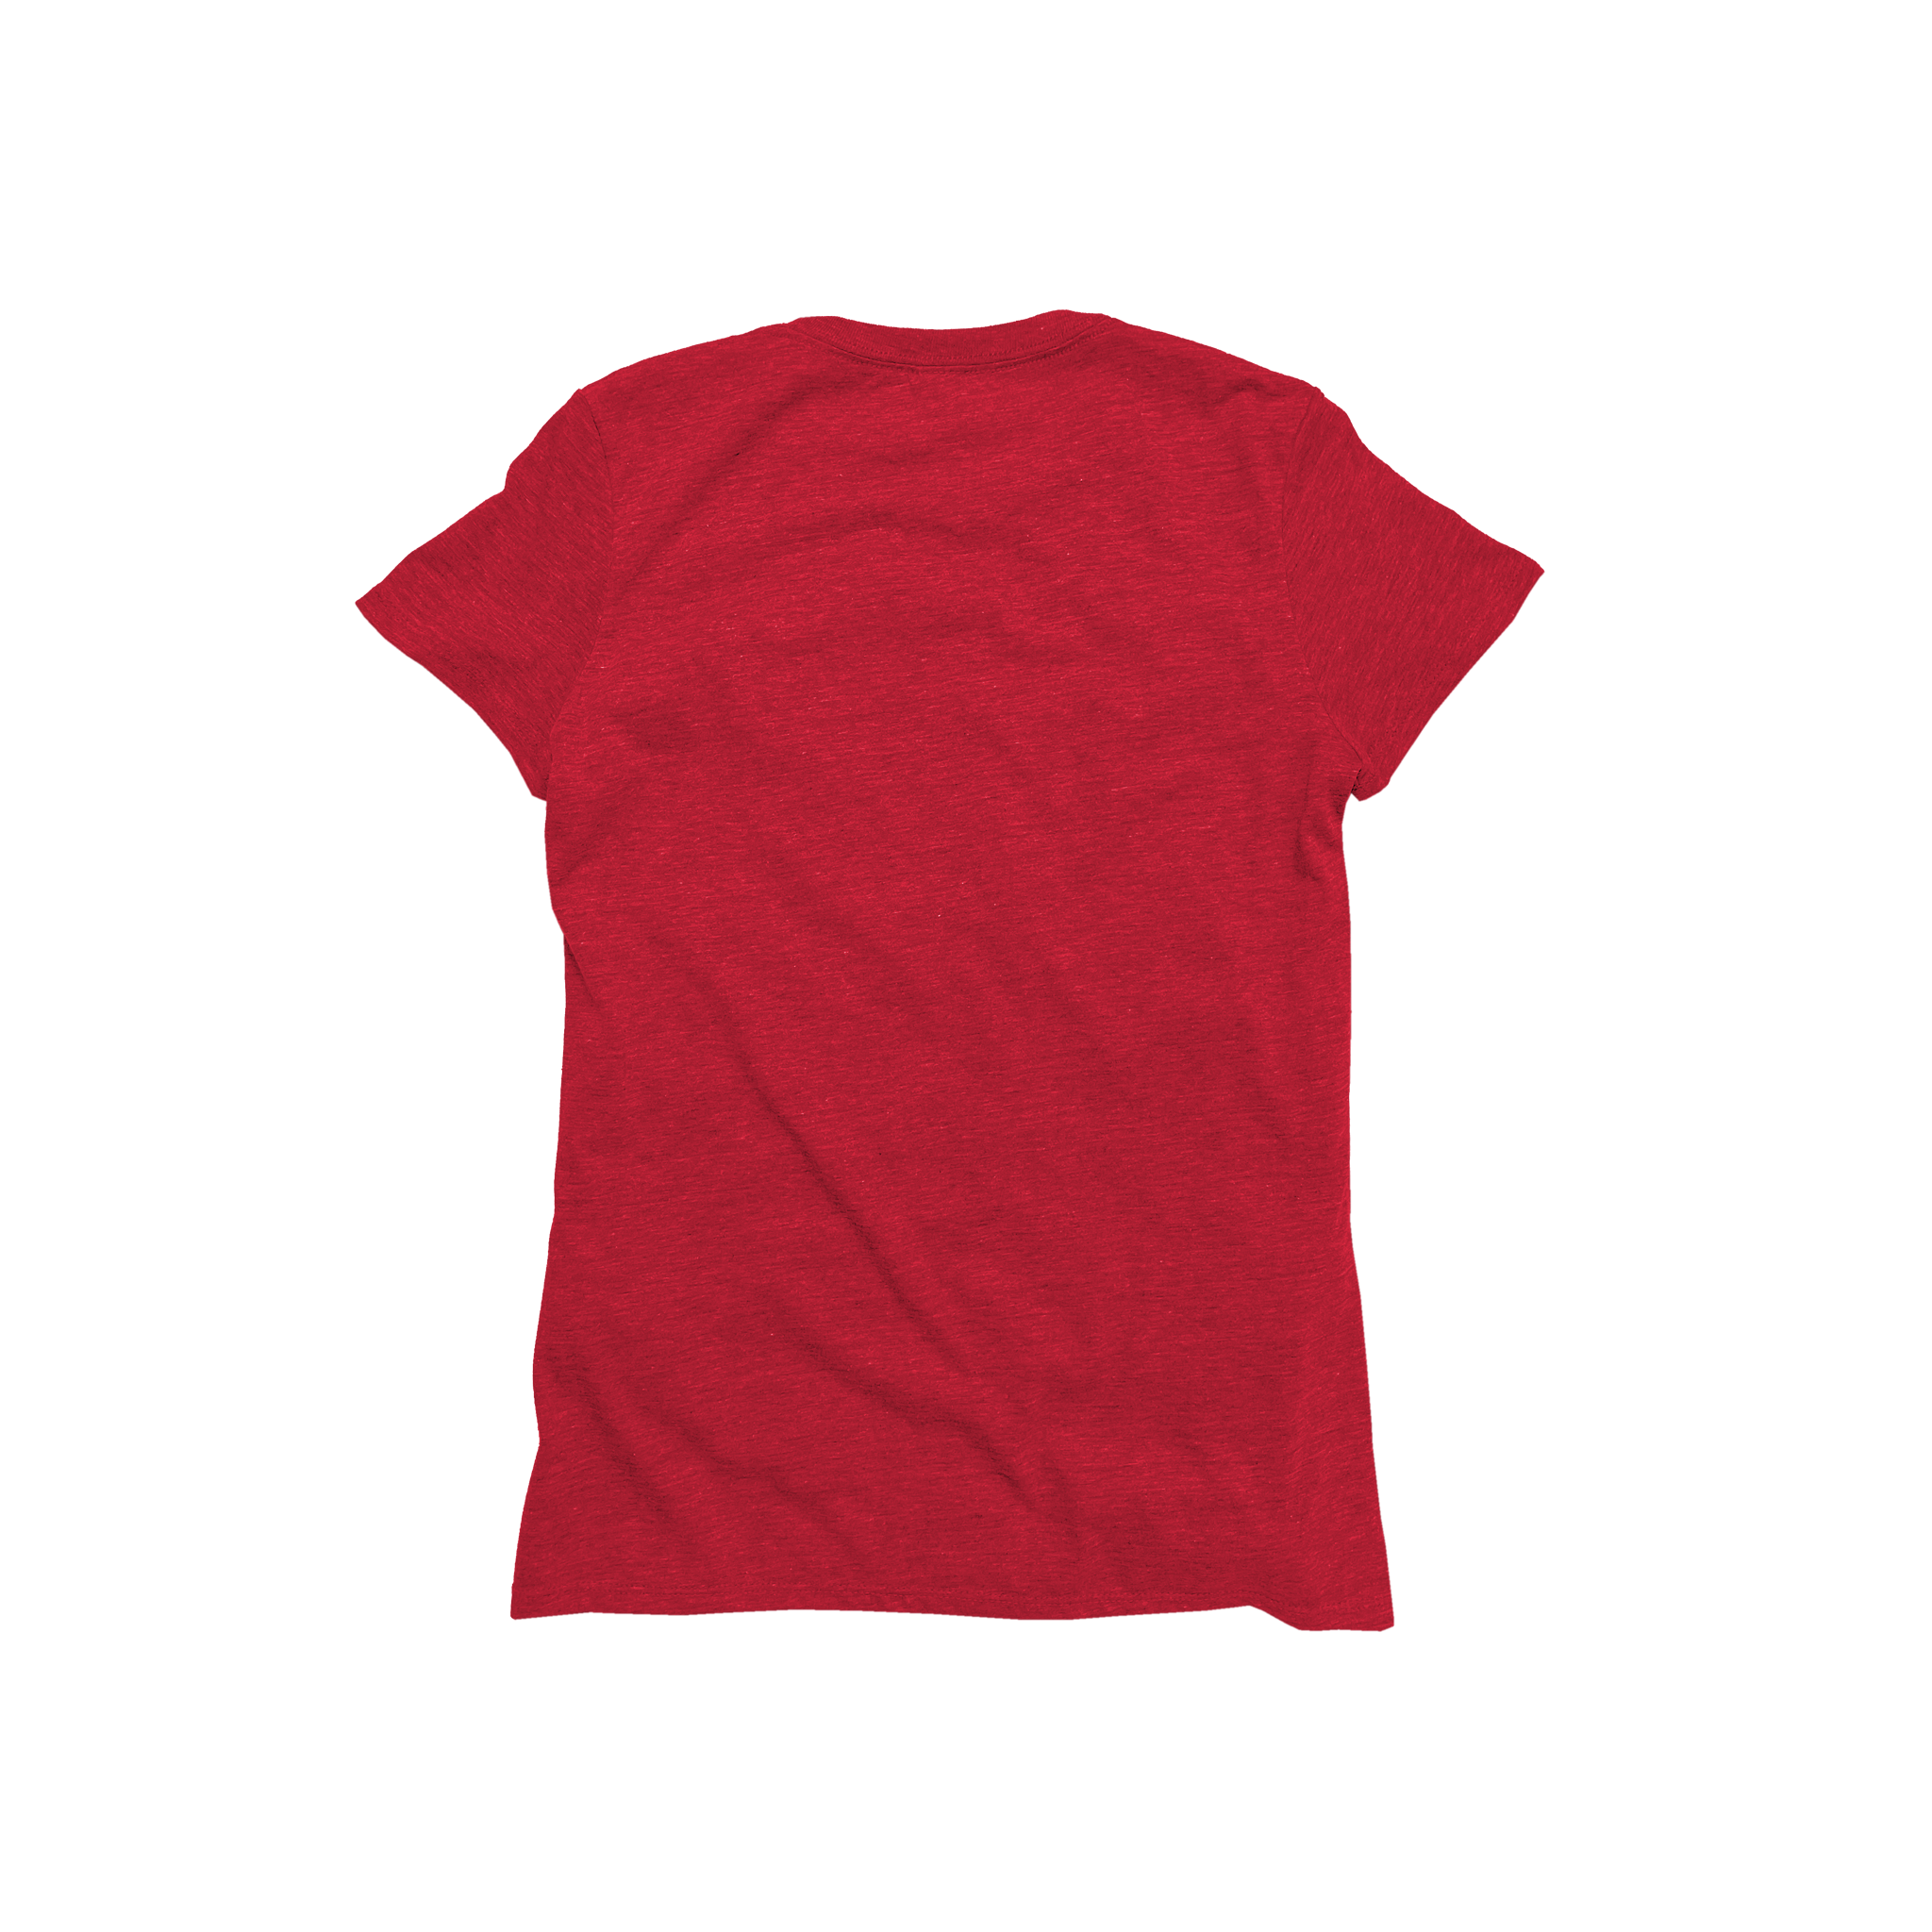 Back Flat Lay of GOEX Ladies Eco Triblend Tee in Red